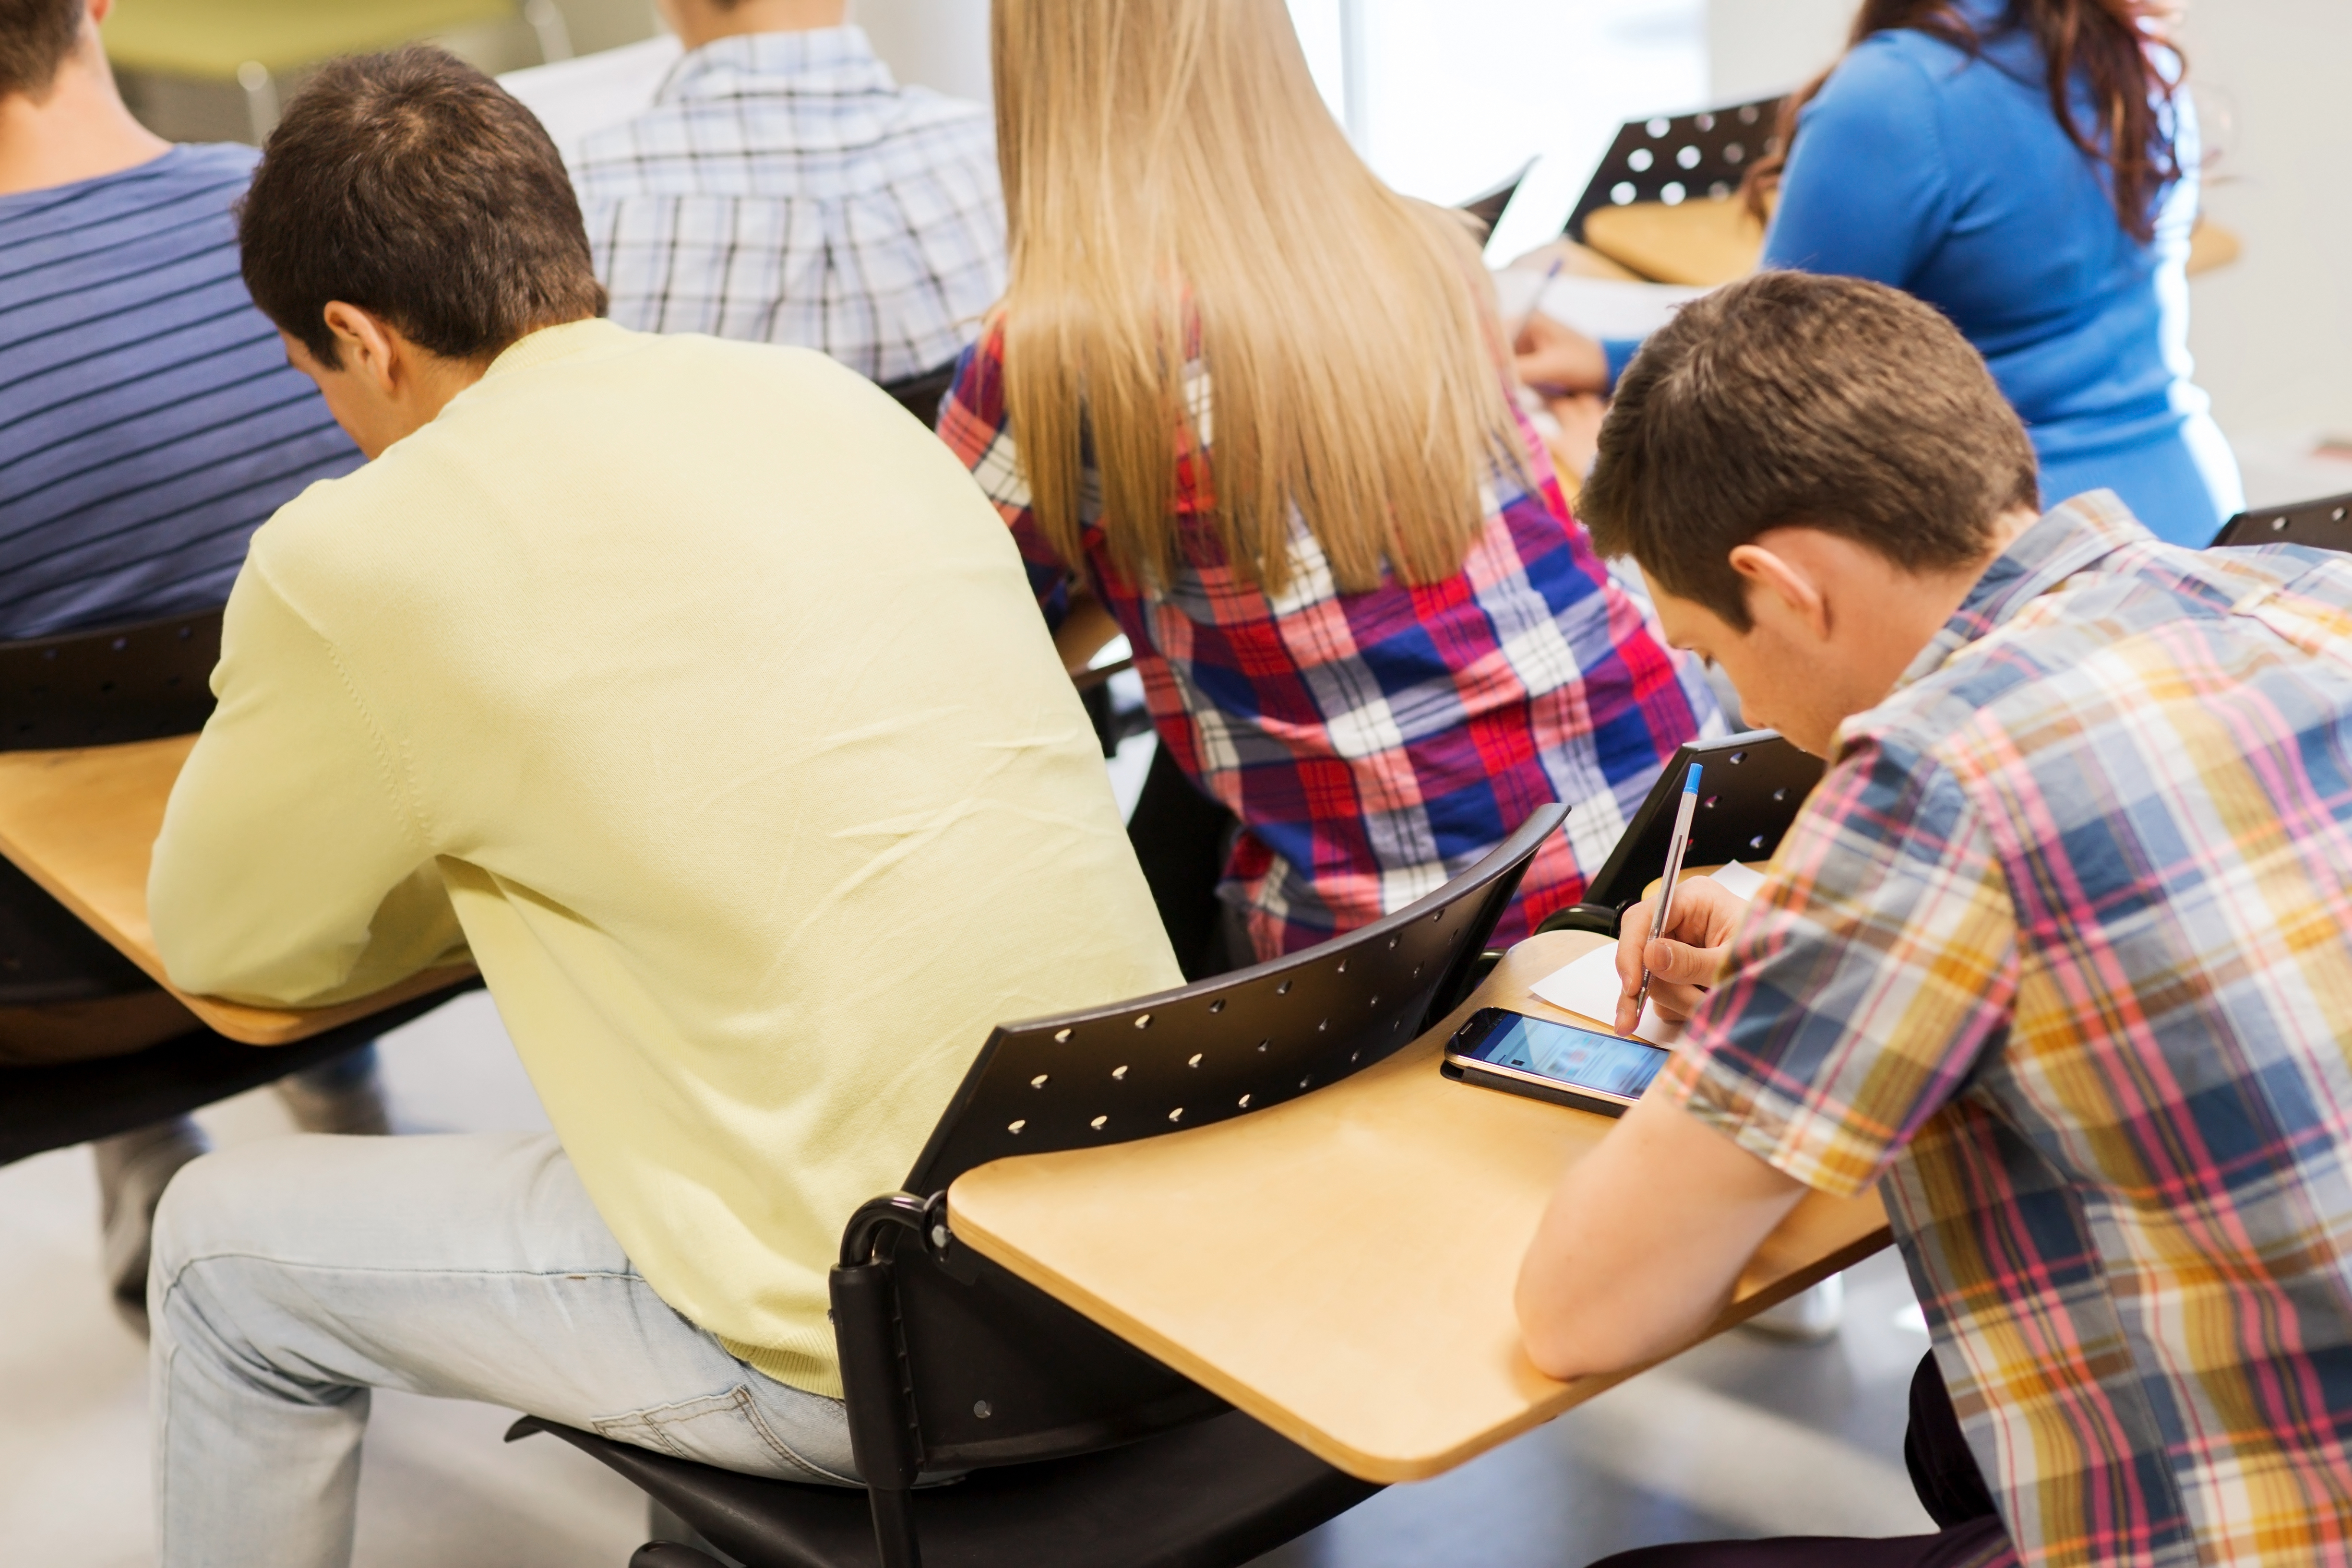 Pictured is a student using a cell phone during class. SHUTTERSTOCK/ Syda Productions